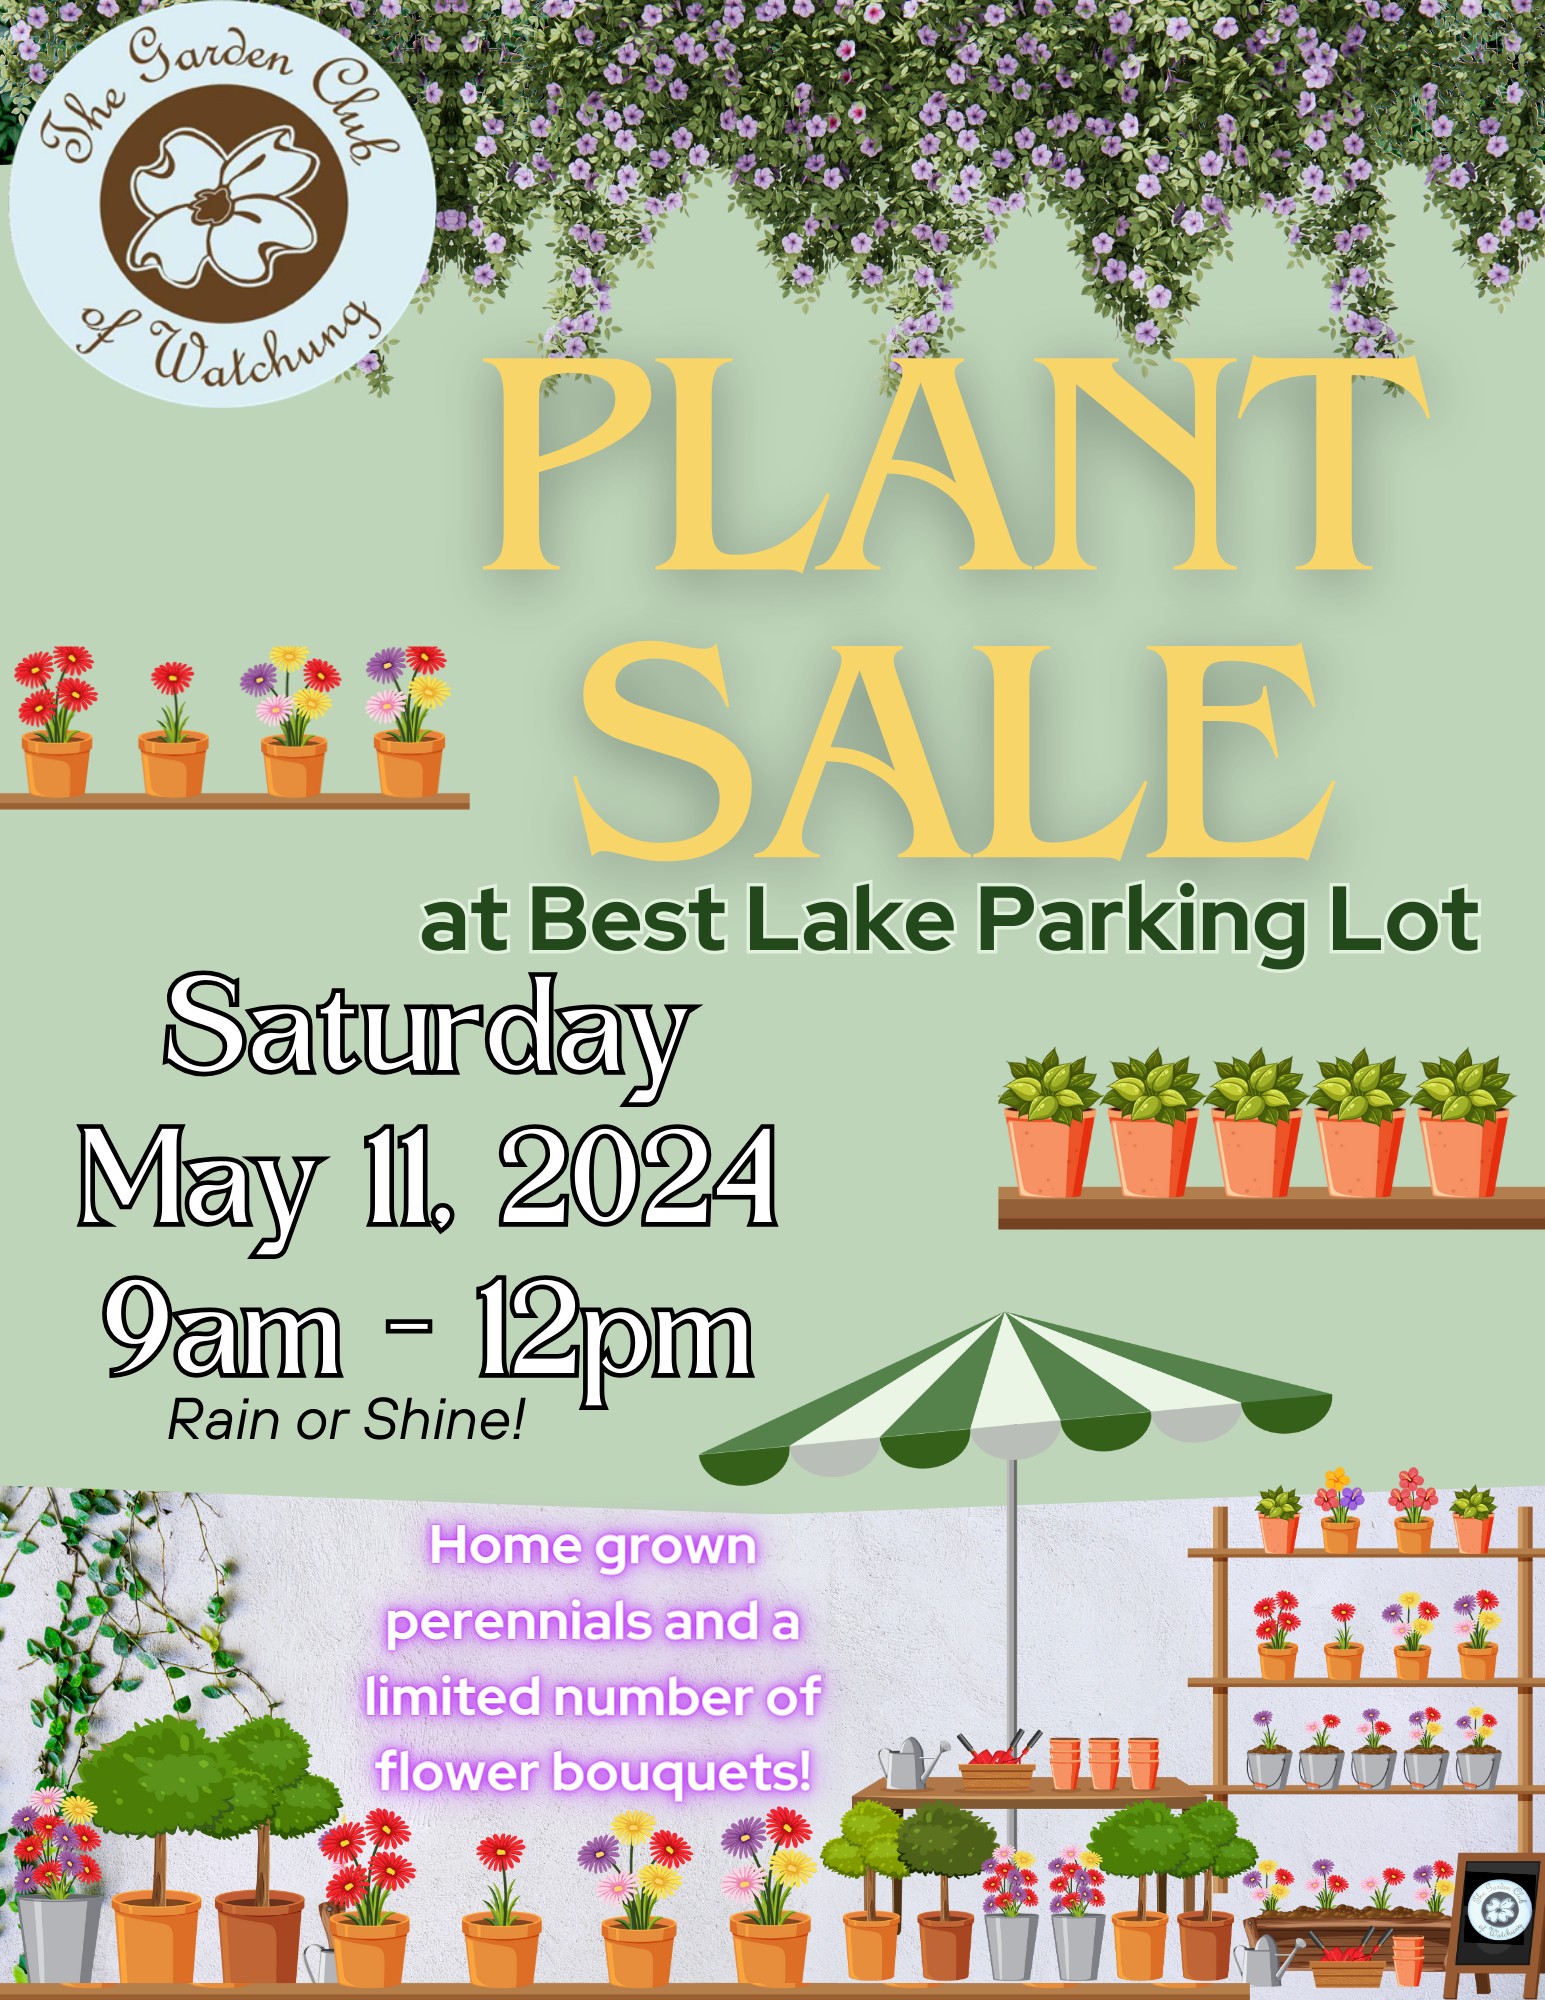 Garden Club of Watchung’s 58th annual Plant Sale